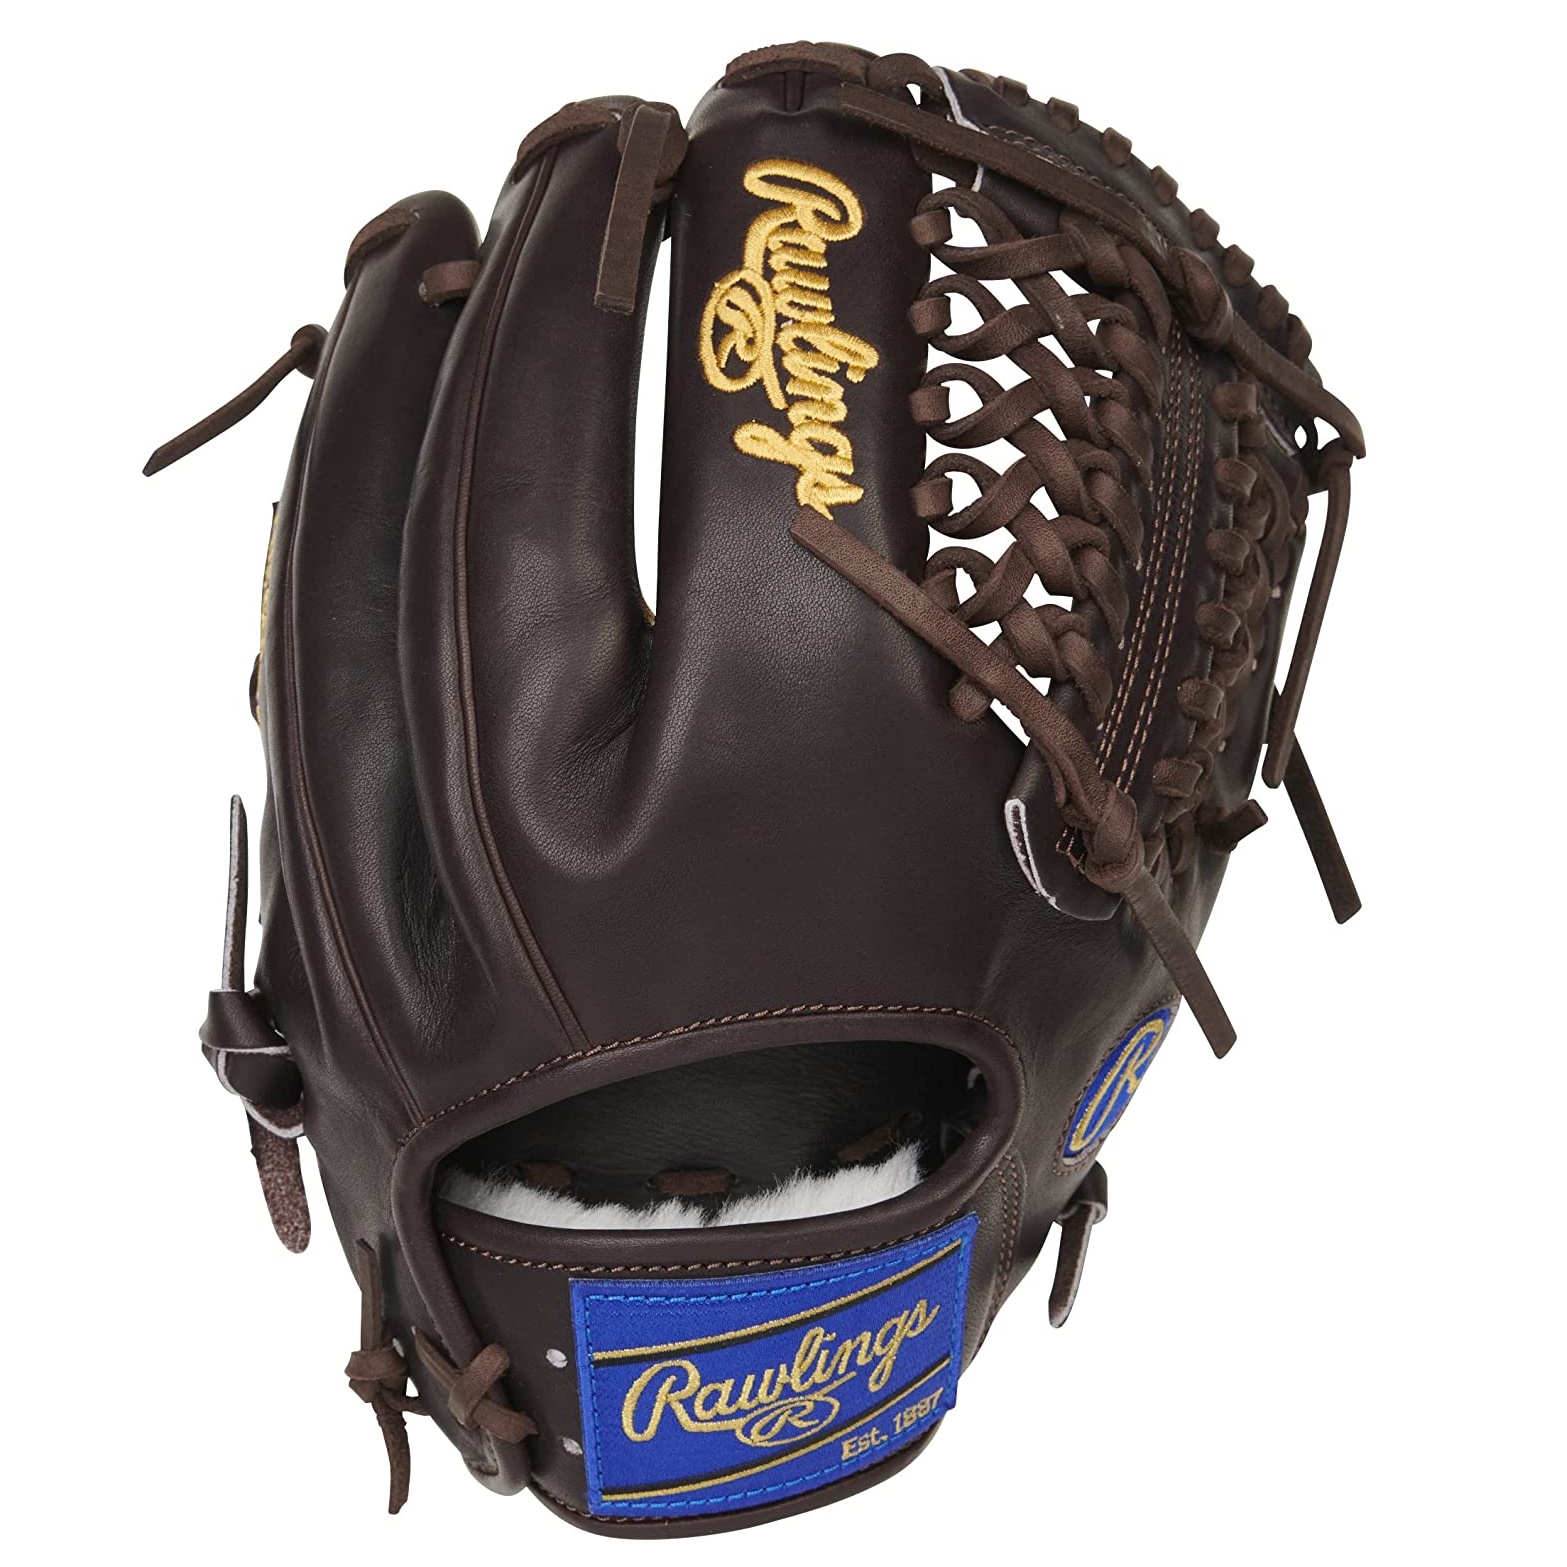 rawlings-pro-preferred-baseball-glove-11-75-inch-mocha-right-hand-throw PROS205-4MO-RightHandThrow Rawlings  <p><span>The Pro Preferred line of baseball gloves from Rawlings are known